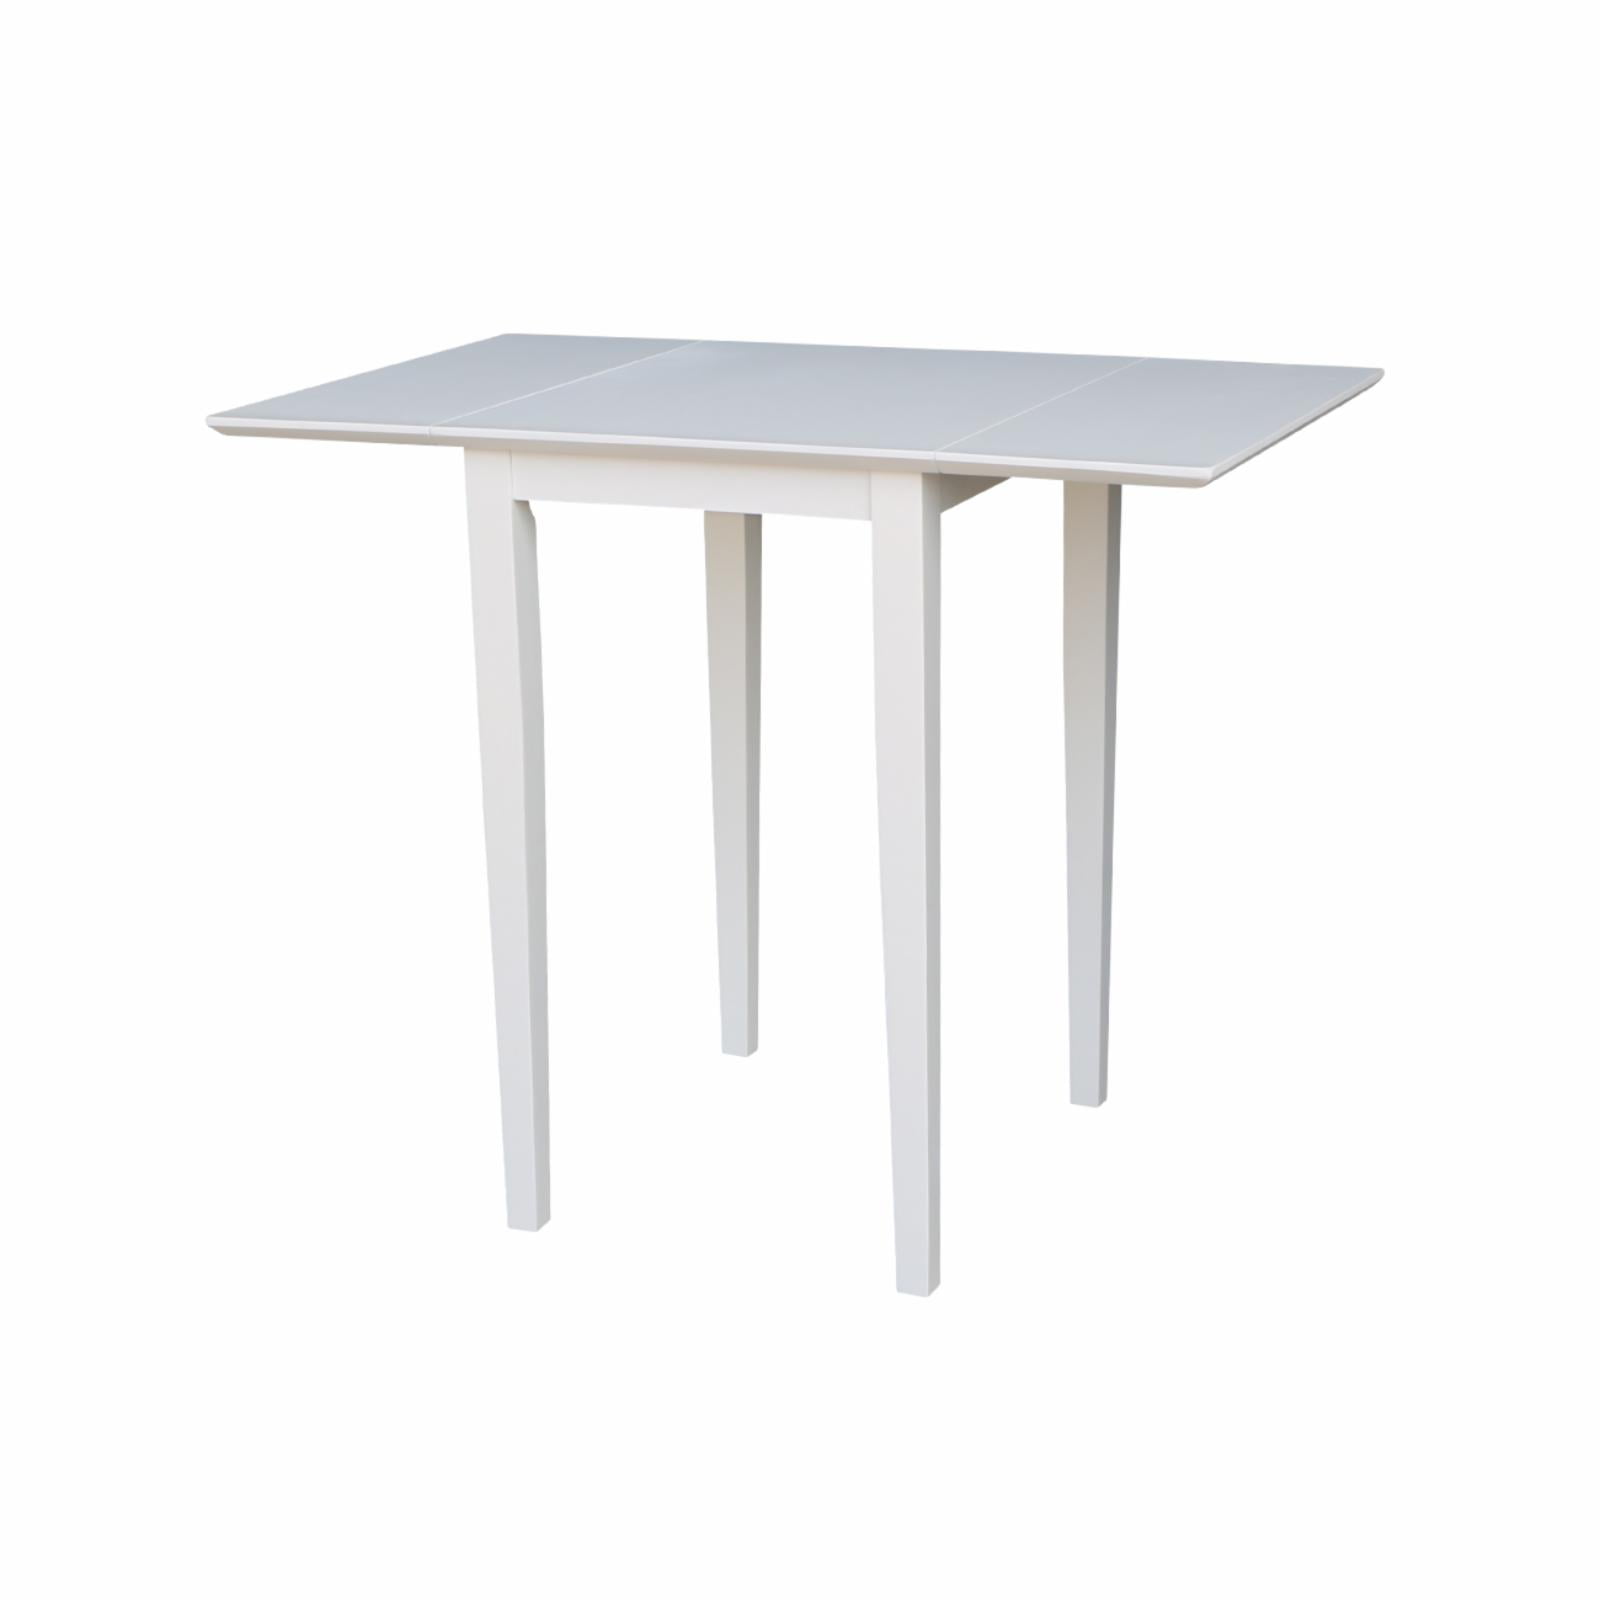 Unfinished International Concepts Small Drop-leaf Table